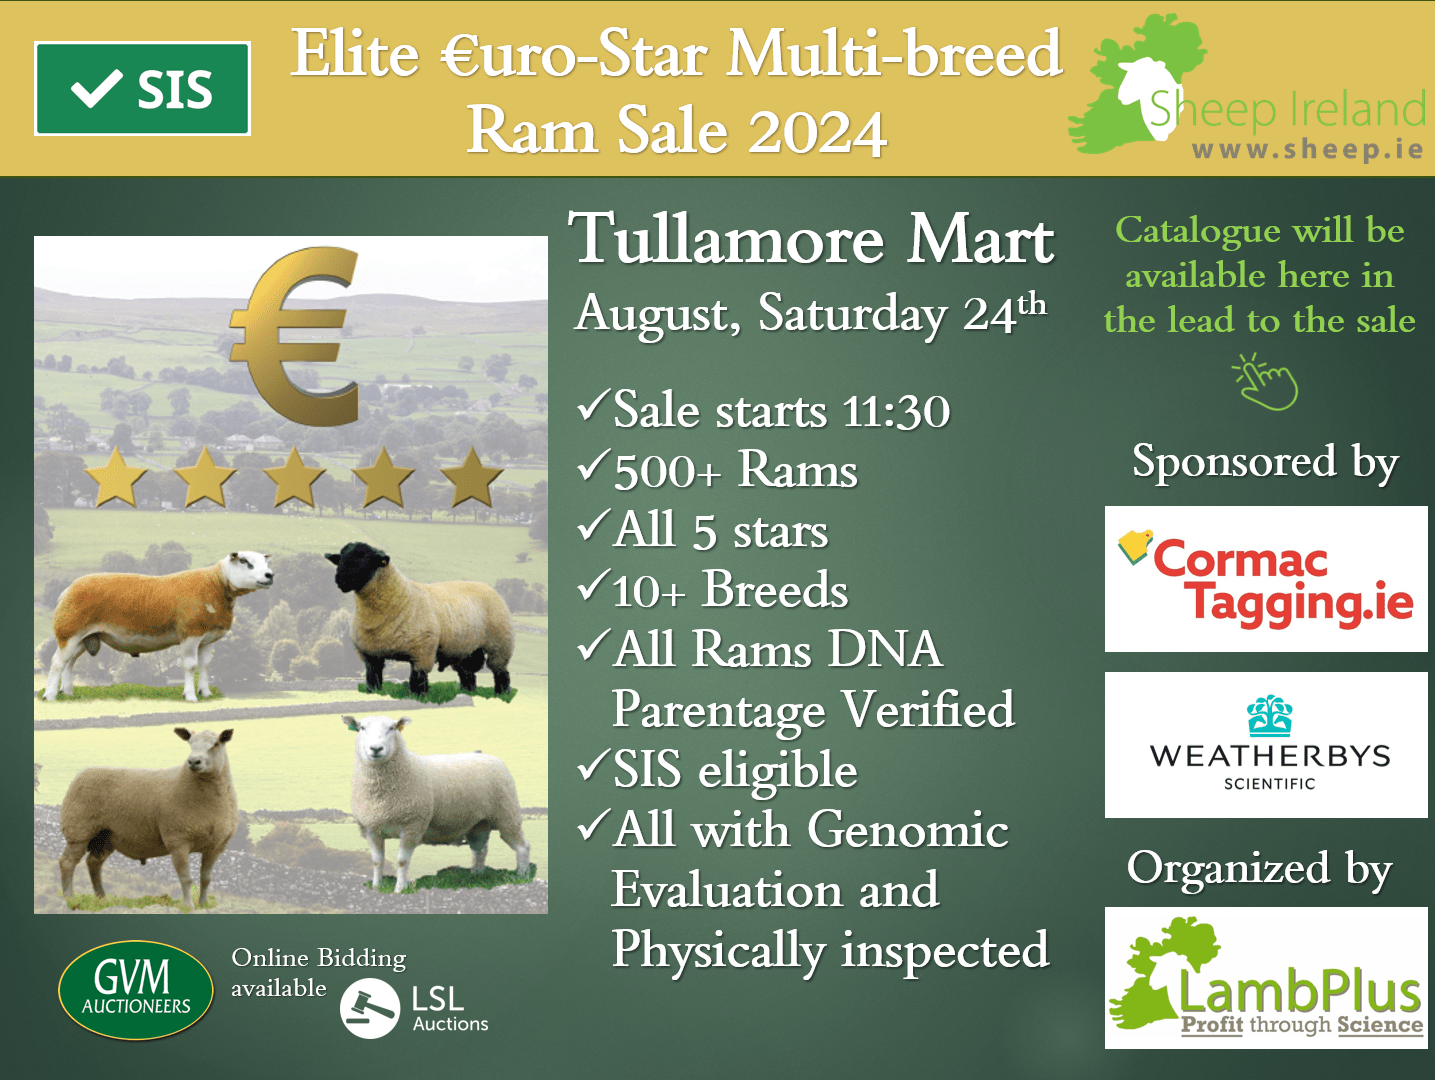 You are currently viewing 90 days countdown for the 2024 Elite €uroStar Multi-Breed Ram sale